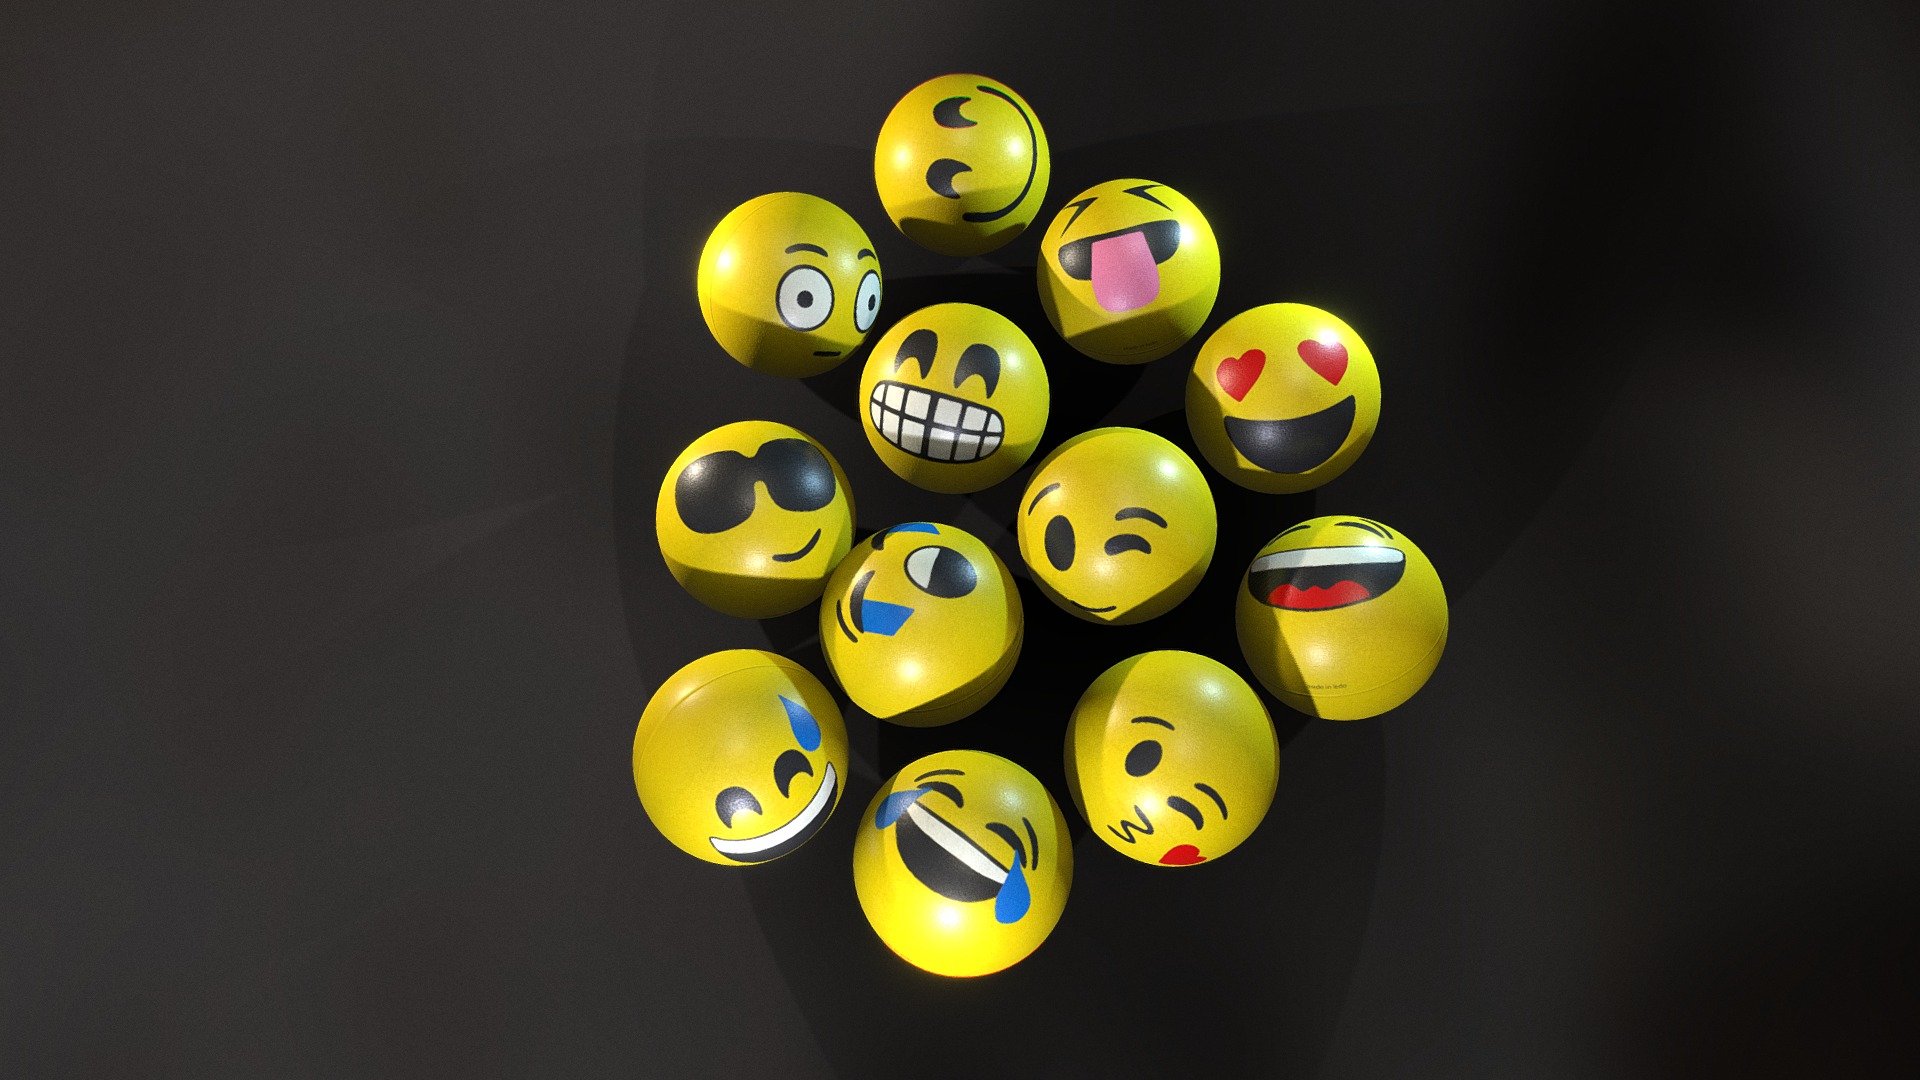 This is a 3d model of Smiley balls for using as toys. It is can be used as childrens toys or decoration assets for games and many other render scenes.

This model is created in 3ds Max and textured in Substance Painter.

This model is made in real proportions.

High quality of textures are available to download.

Maps include - Base Color, Normal, AO and Roughness Textures 3d model